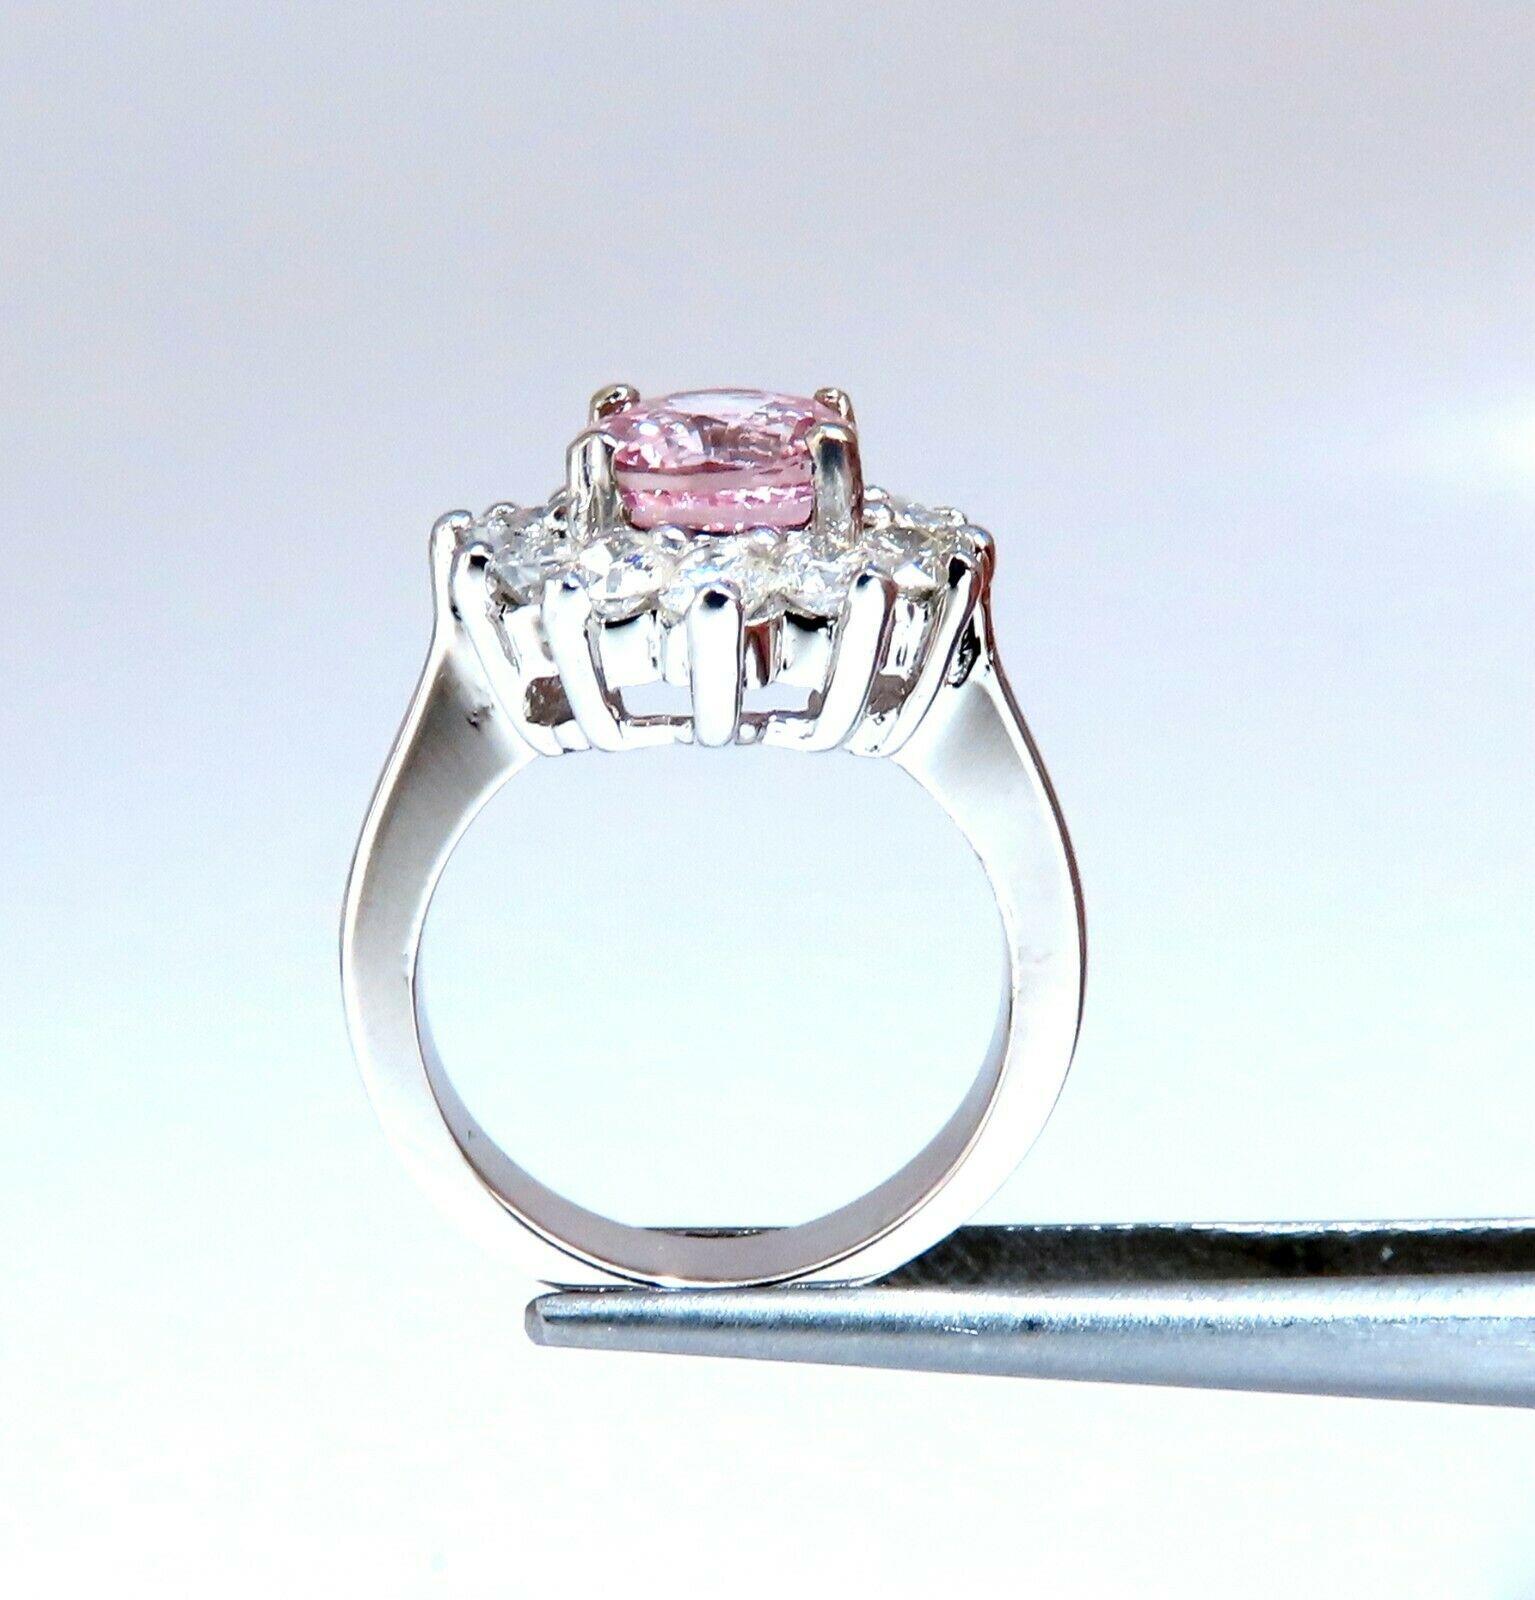 GIA Certified 3.58 Carat Natural Padparadscha Pink Sapphire Diamond Ring Fine For Sale 2